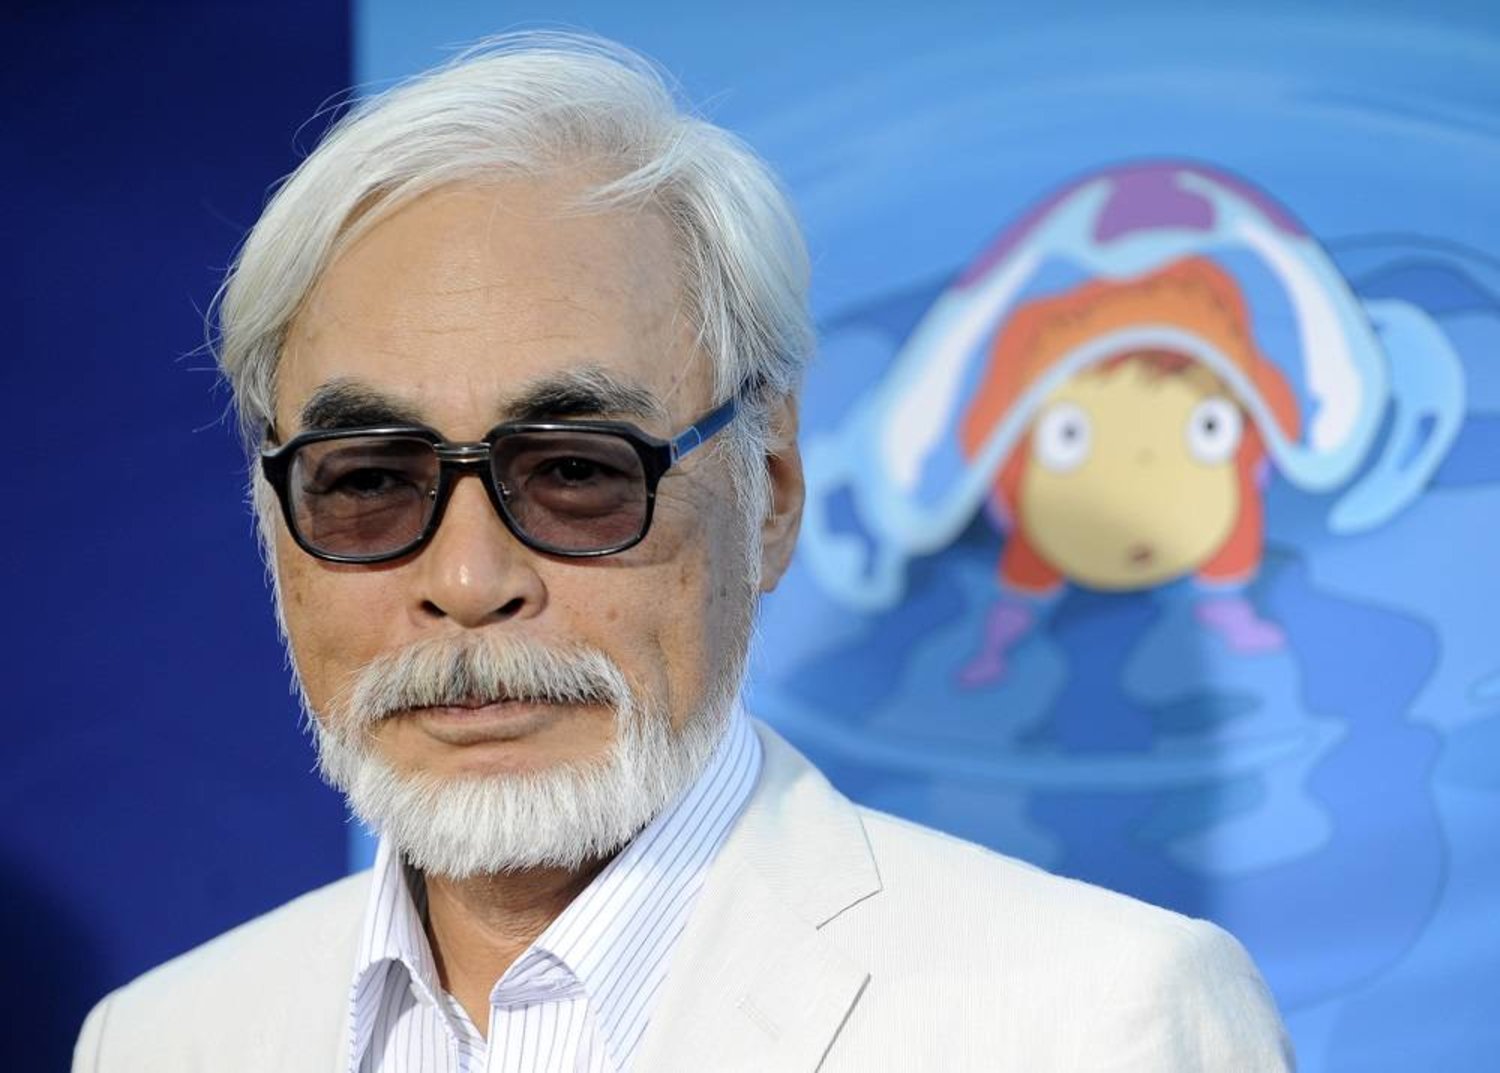 Hayao Miyazaki of Japan, director of the animated film "Ponyo," poses at a special screening of the film in Los Angeles on July 27, 2009. (AP)